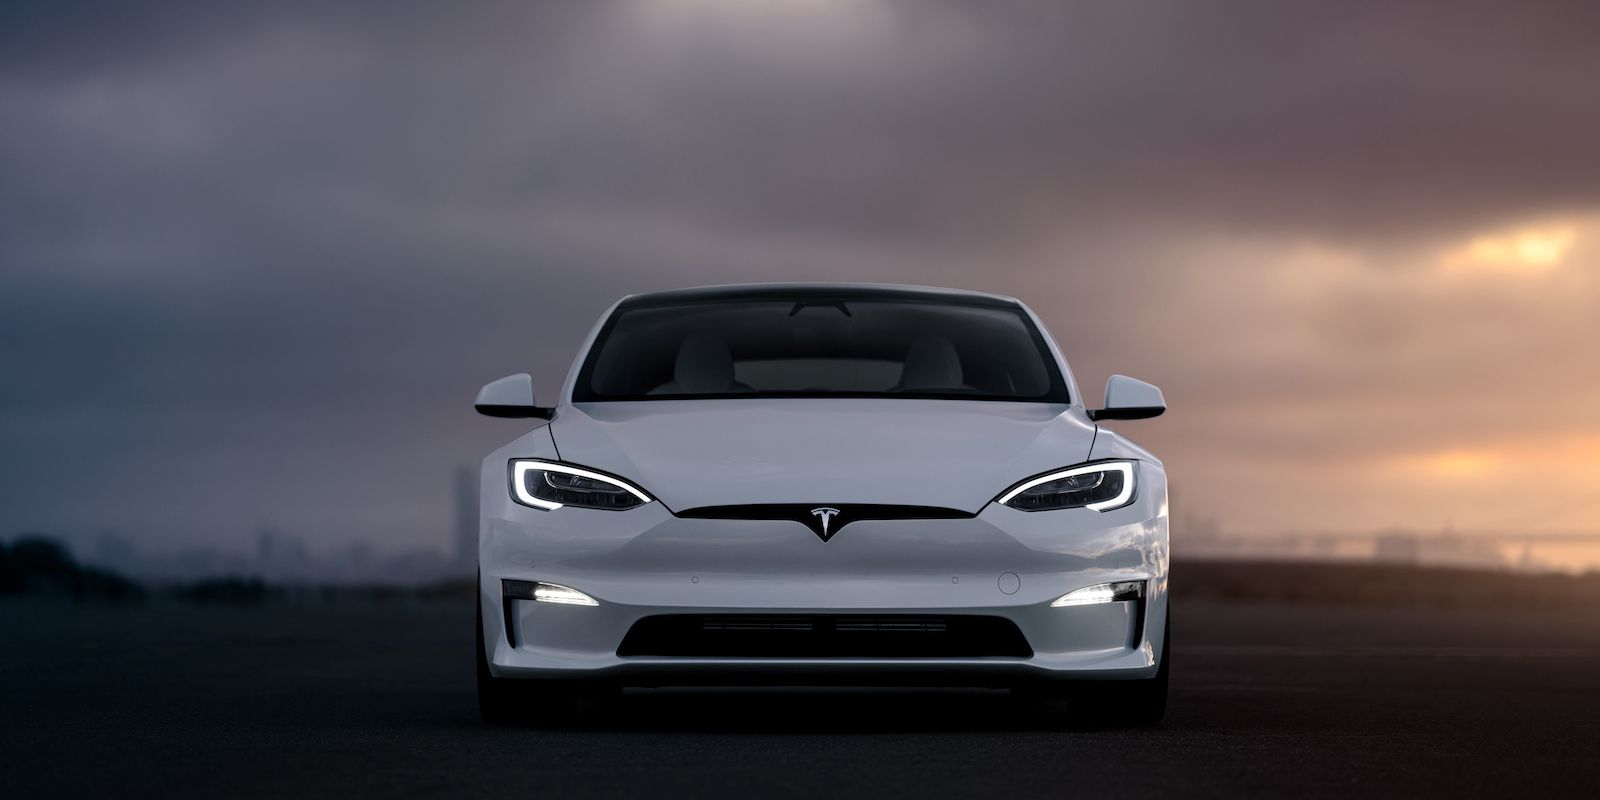 7 things to consider before buying a used Tesla